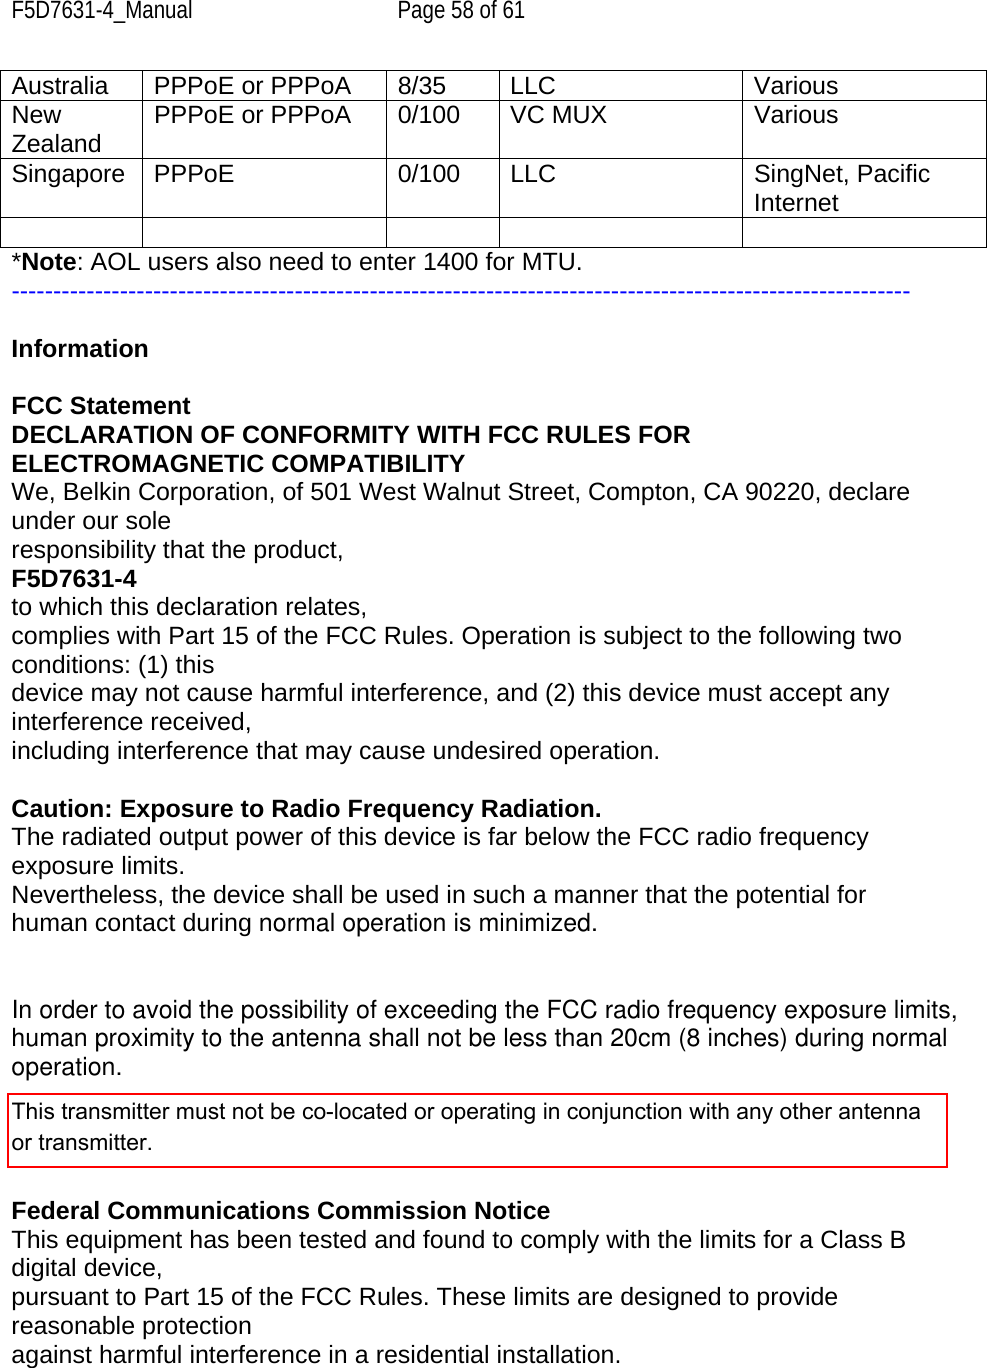 F5D7631-4_Manual  Page 58 of 61 Australia  PPPoE or PPPoA  8/35  LLC  Various New Zealand  PPPoE or PPPoA  0/100 VC MUX  Various Singapore PPPoE  0/100  LLC  SingNet, Pacific Internet      *Note: AOL users also need to enter 1400 for MTU. ------------------------------------------------------------------------------------------------------------  Information  FCC Statement DECLARATION OF CONFORMITY WITH FCC RULES FOR ELECTROMAGNETIC COMPATIBILITY We, Belkin Corporation, of 501 West Walnut Street, Compton, CA 90220, declare under our sole responsibility that the product, F5D7631-4    to which this declaration relates, complies with Part 15 of the FCC Rules. Operation is subject to the following two conditions: (1) this device may not cause harmful interference, and (2) this device must accept any interference received, including interference that may cause undesired operation.  Caution: Exposure to Radio Frequency Radiation. The radiated output power of this device is far below the FCC radio frequency exposure limits. Nevertheless, the device shall be used in such a manner that the potential for human contact during normal operation is minimized. In order to avoid the possibility of exceeding the FCC radio frequency exposure limits, human proximity to the antenna shall not be less than 20cm (8 inches) during normal  operation.  Federal Communications Commission Notice This equipment has been tested and found to comply with the limits for a Class B digital device, pursuant to Part 15 of the FCC Rules. These limits are designed to provide reasonable protection against harmful interference in a residential installation. This transmitter must not be co-located or operating in conjunction with any other antenna or transmitter.